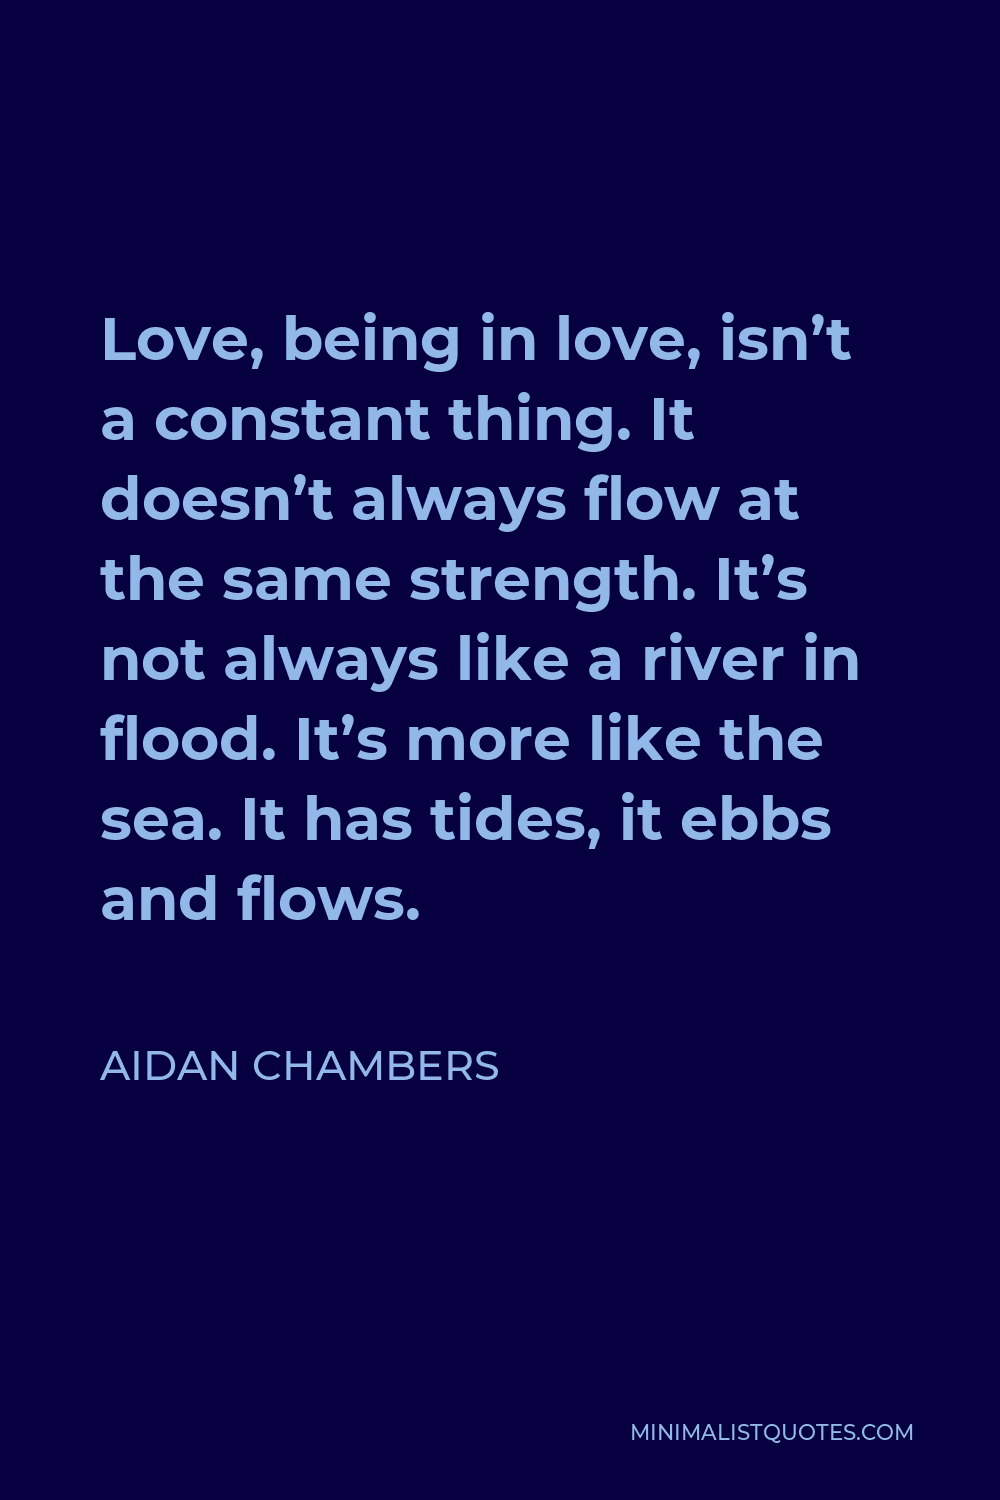 Aidan Chambers Quote - Love, being in love, isn’t a constant thing. It doesn’t always flow at the same strength. It’s not always like a river in flood. It’s more like the sea. It has tides, it ebbs and flows.